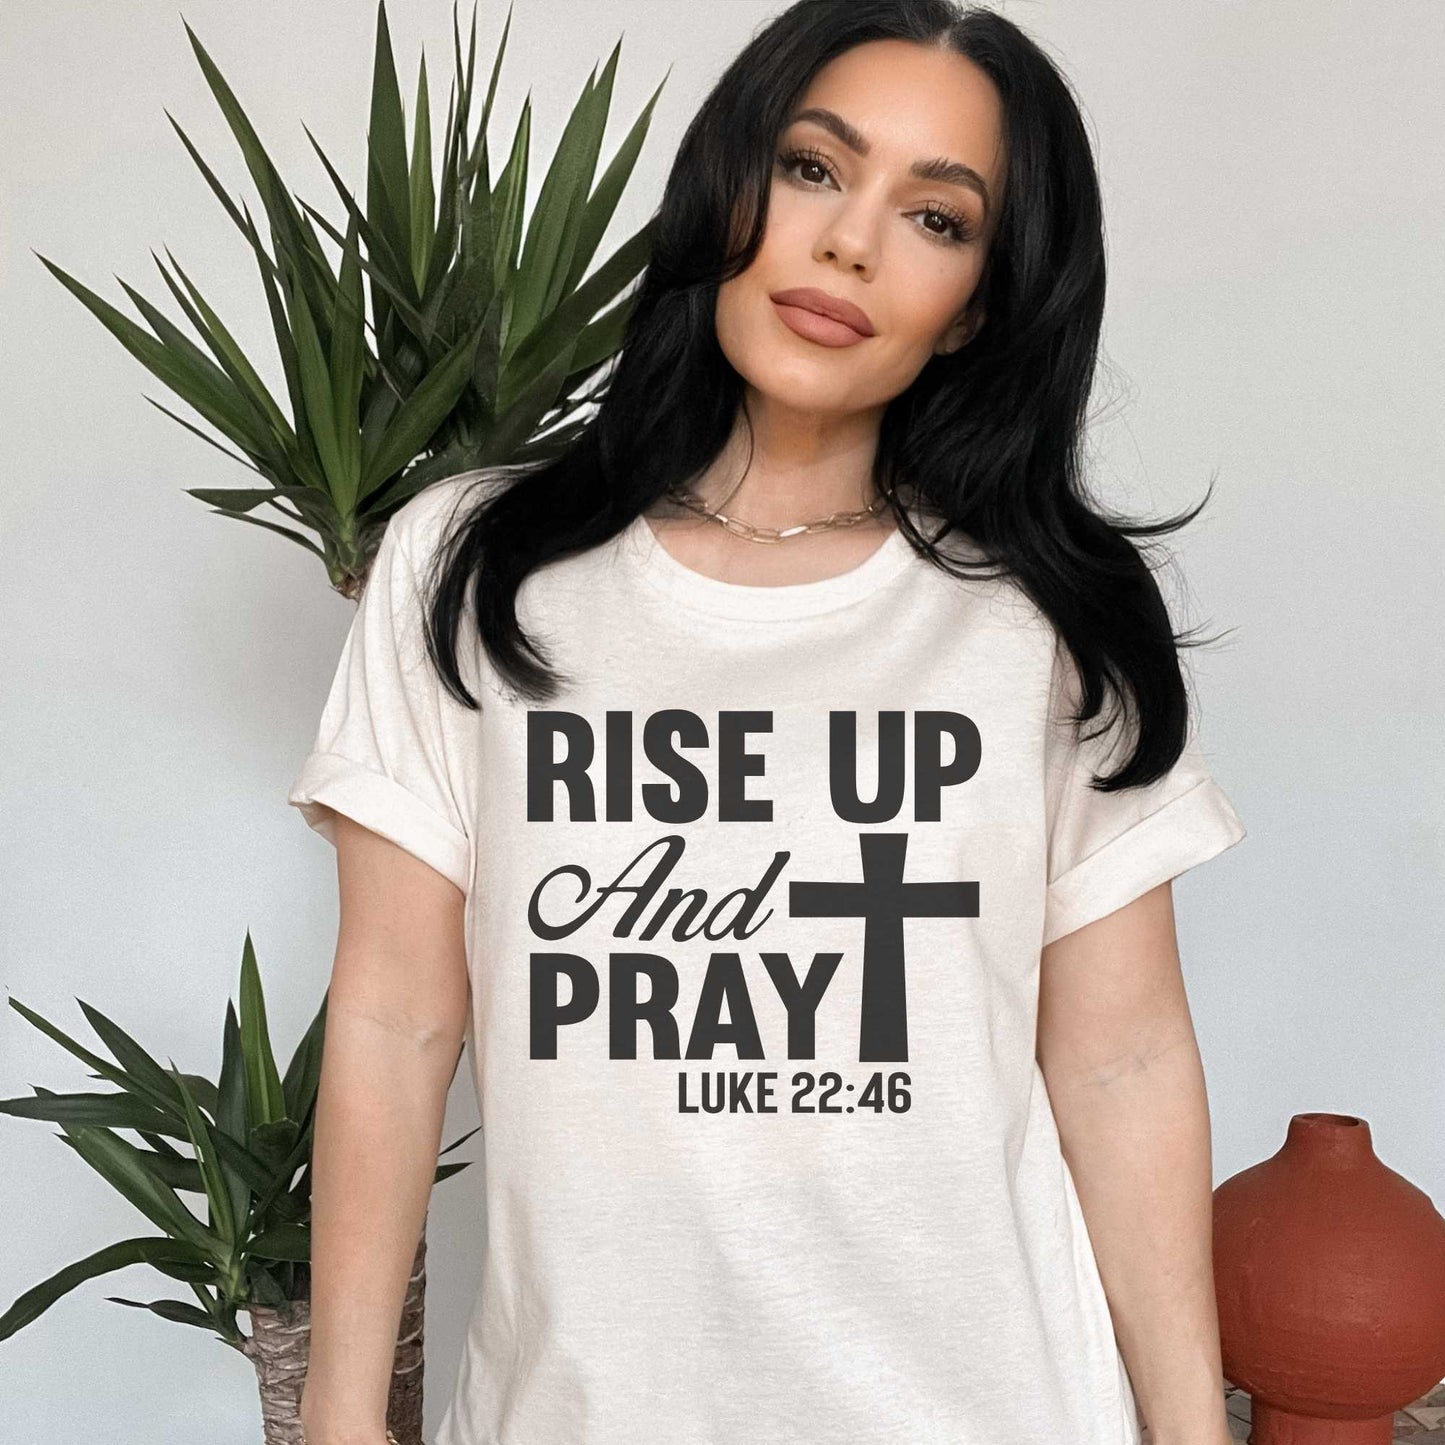 Rise Up and Pray Shirt about God for Women HMDesignStudioUS